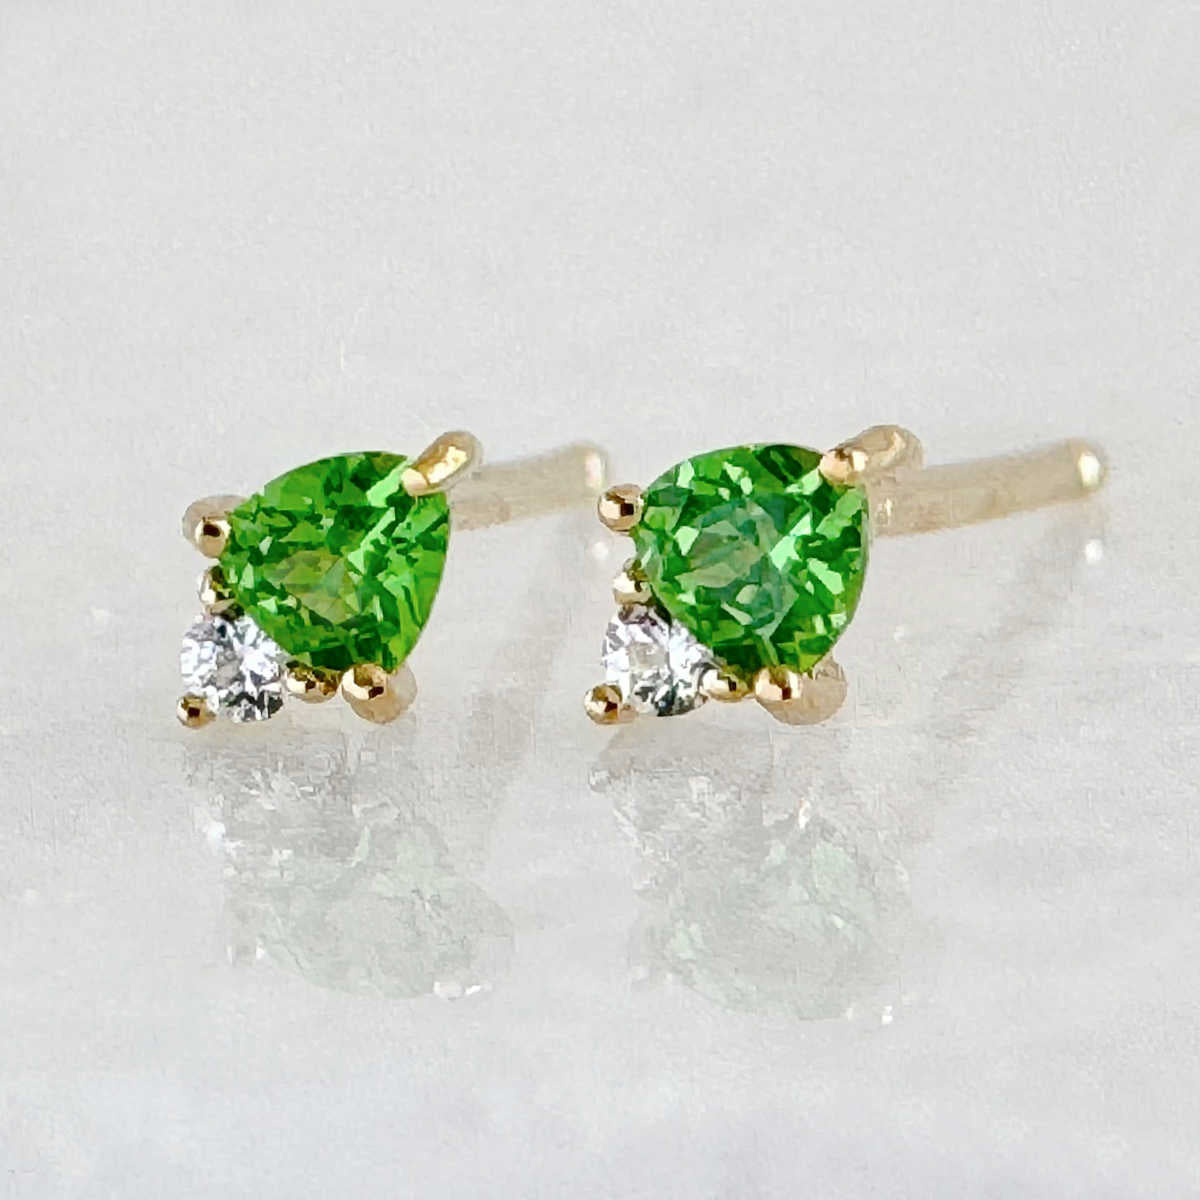 Green Tsavorite & Sapphire Earrings | 14k Solid Gold Studs from Two of Most